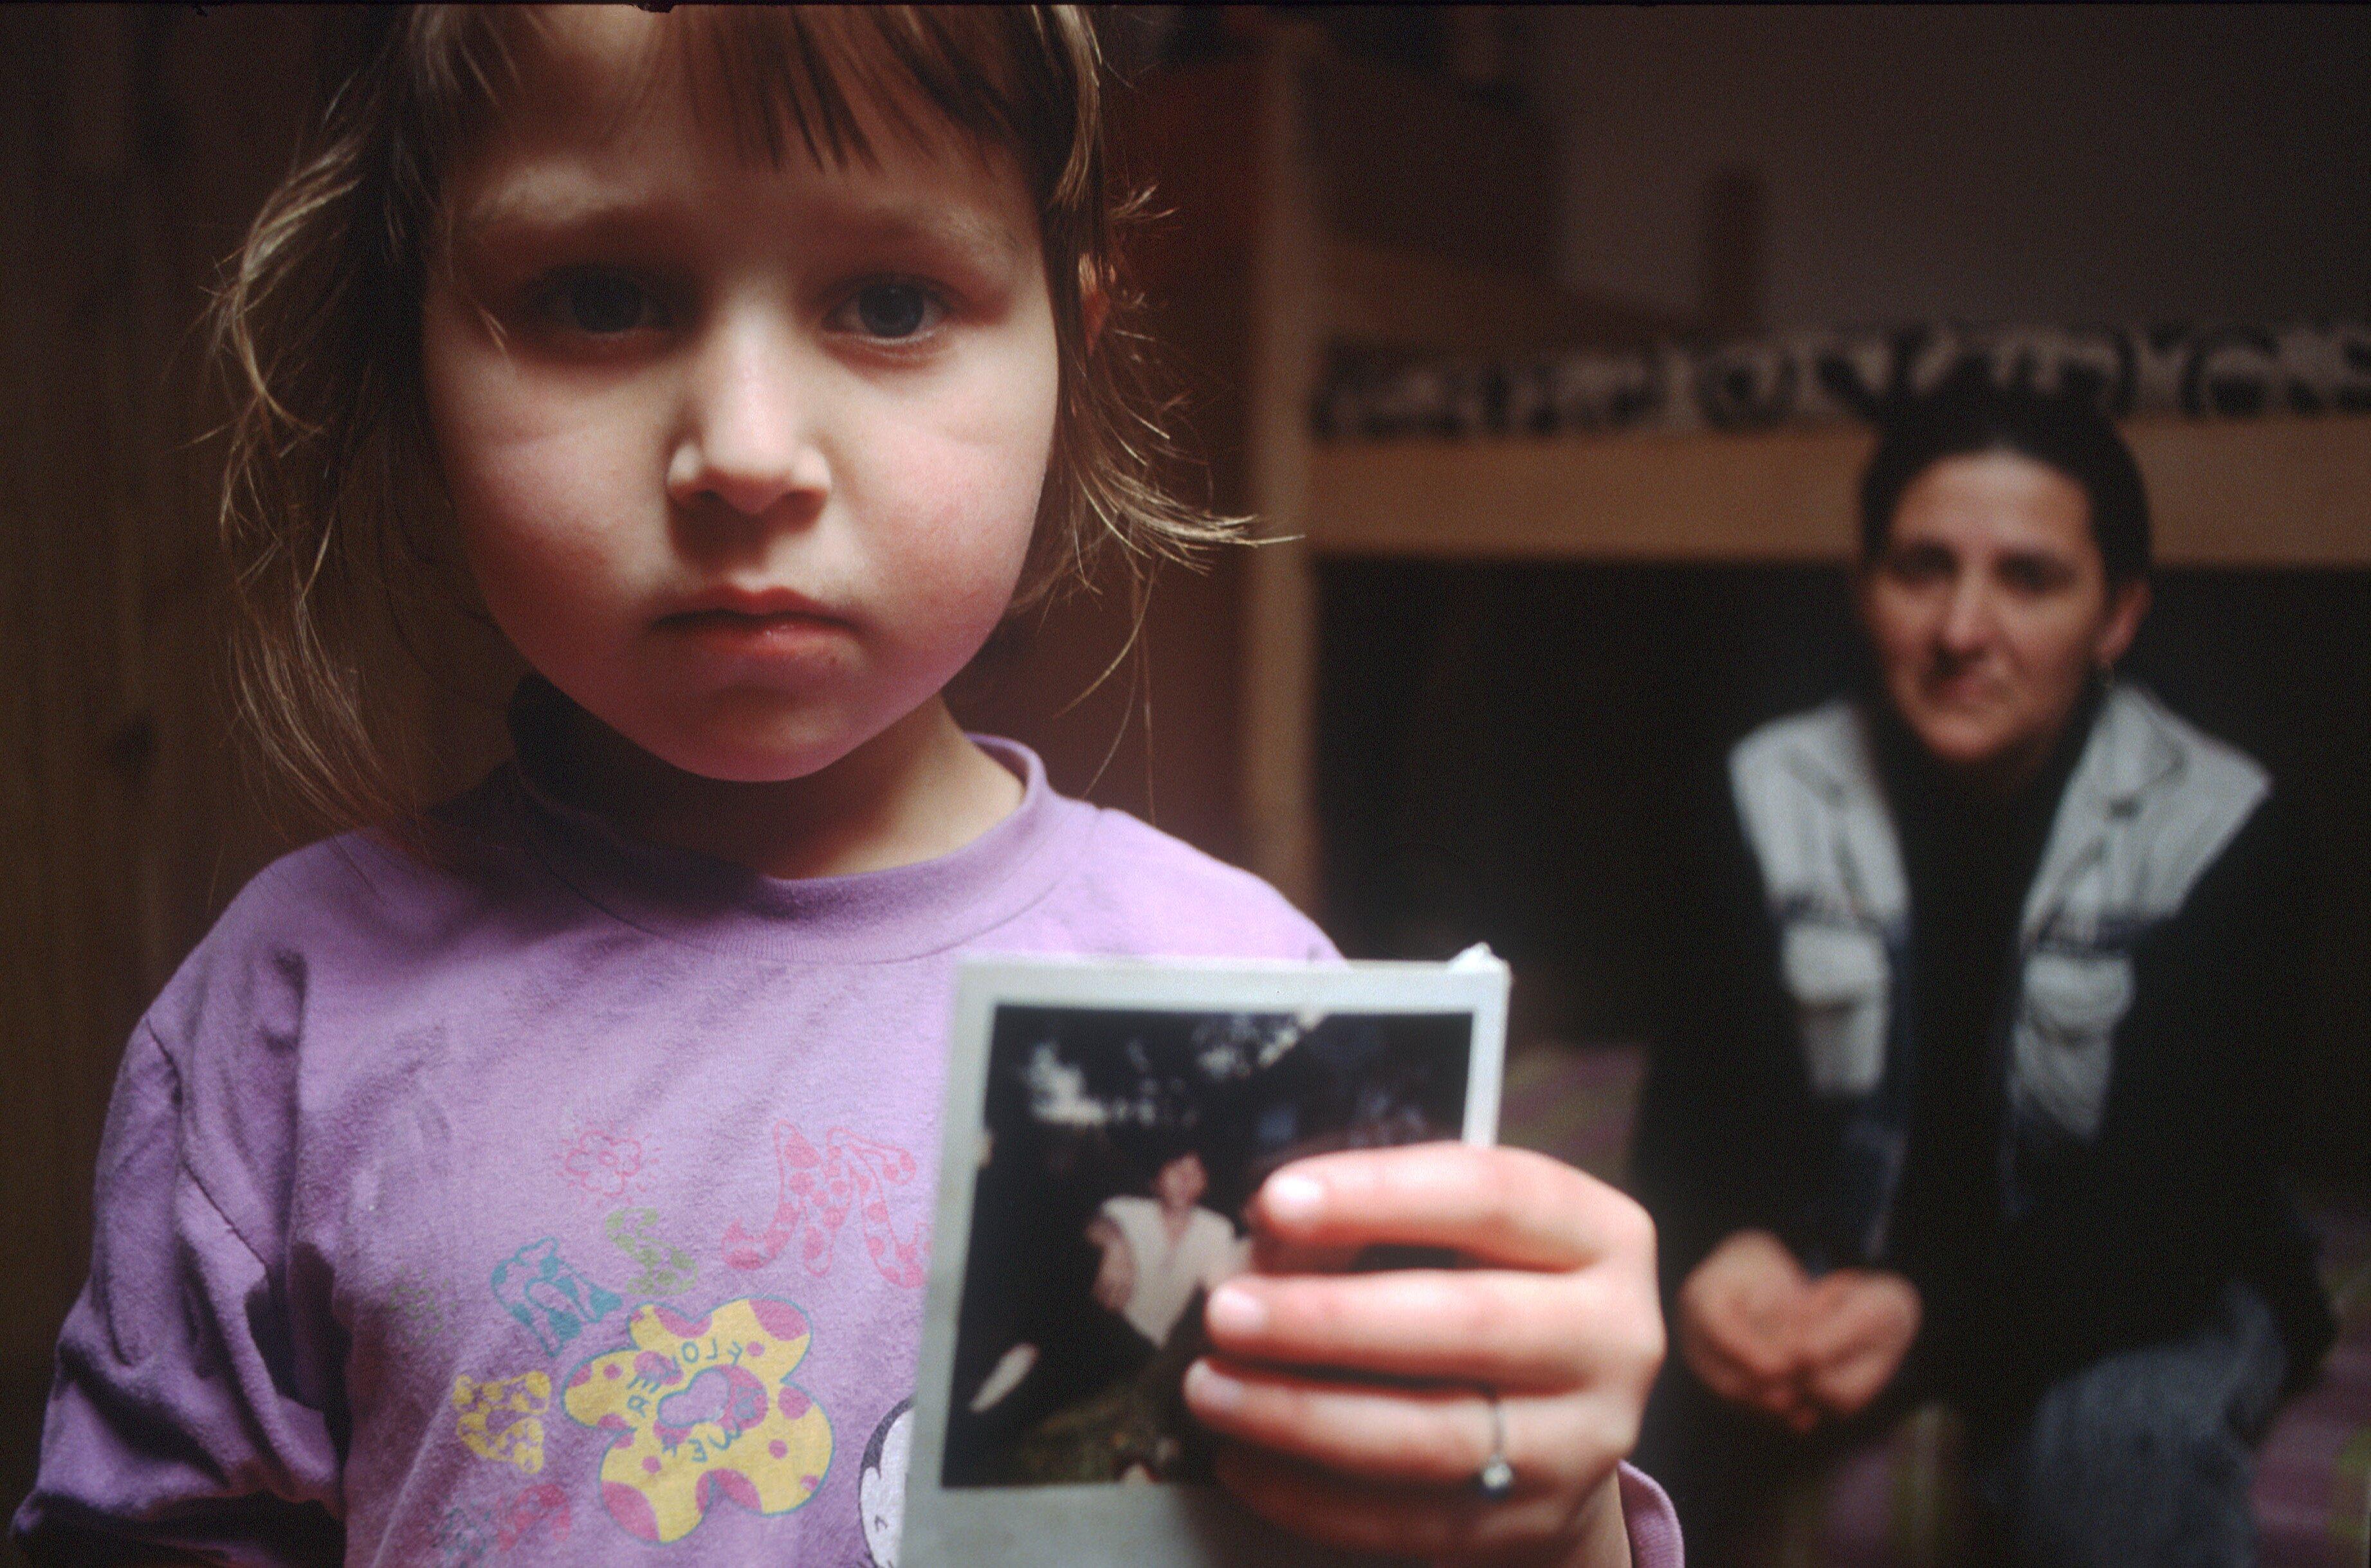 A young girl with a melancholic gaze gently holds a photograph in a bedroom. Behind her, an adult woman sits thoughtfully on the edge of a bed, enveloped in an atmosphere of nostalgia.